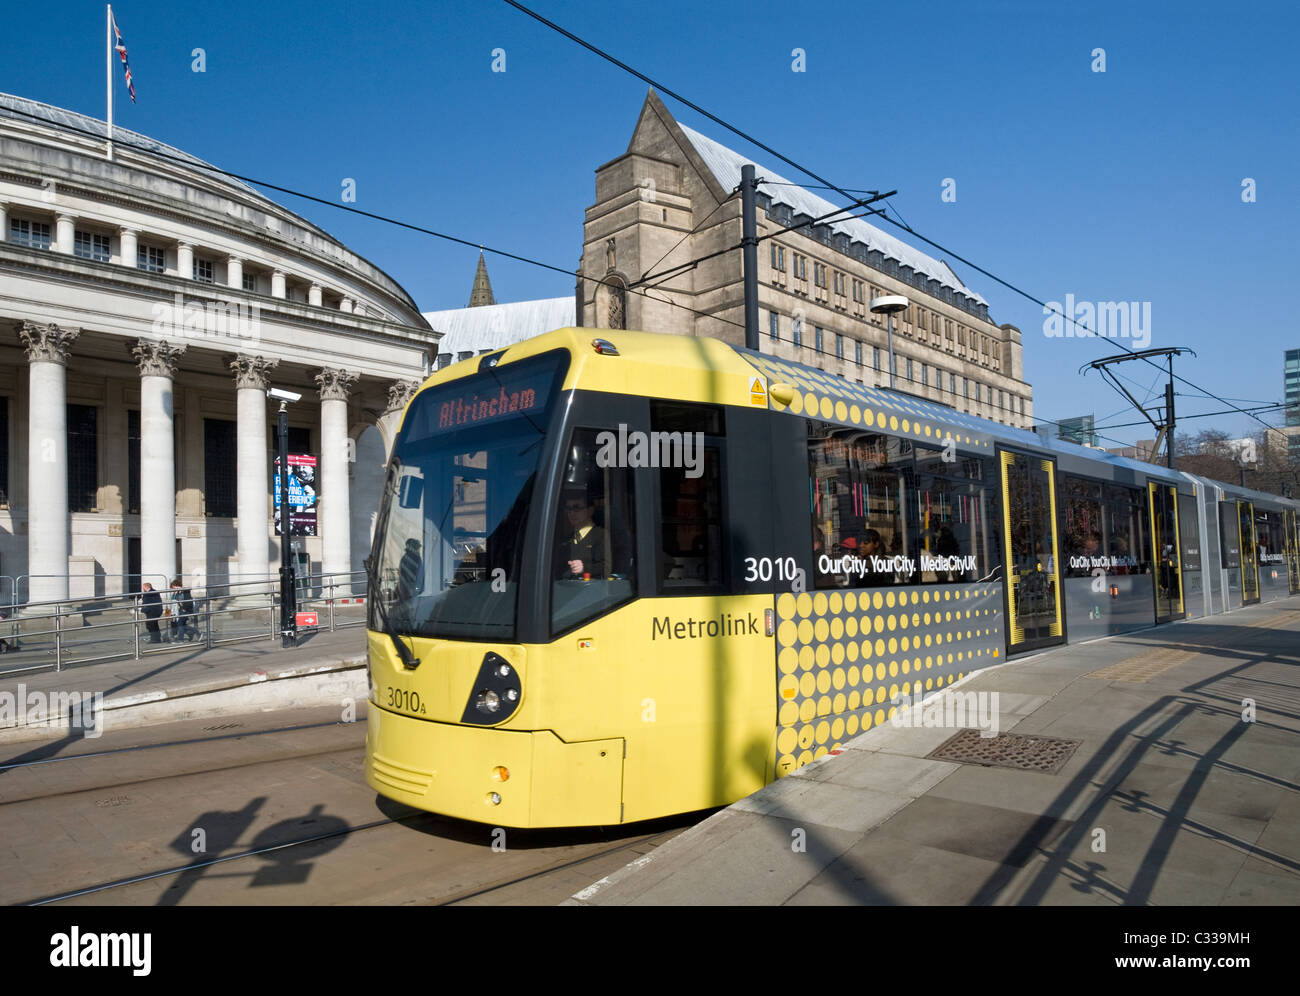 Manchester Metrolink Tram at Platform in front of the Manchester Central Library, Greater Manchester, England, UK Stock Photo